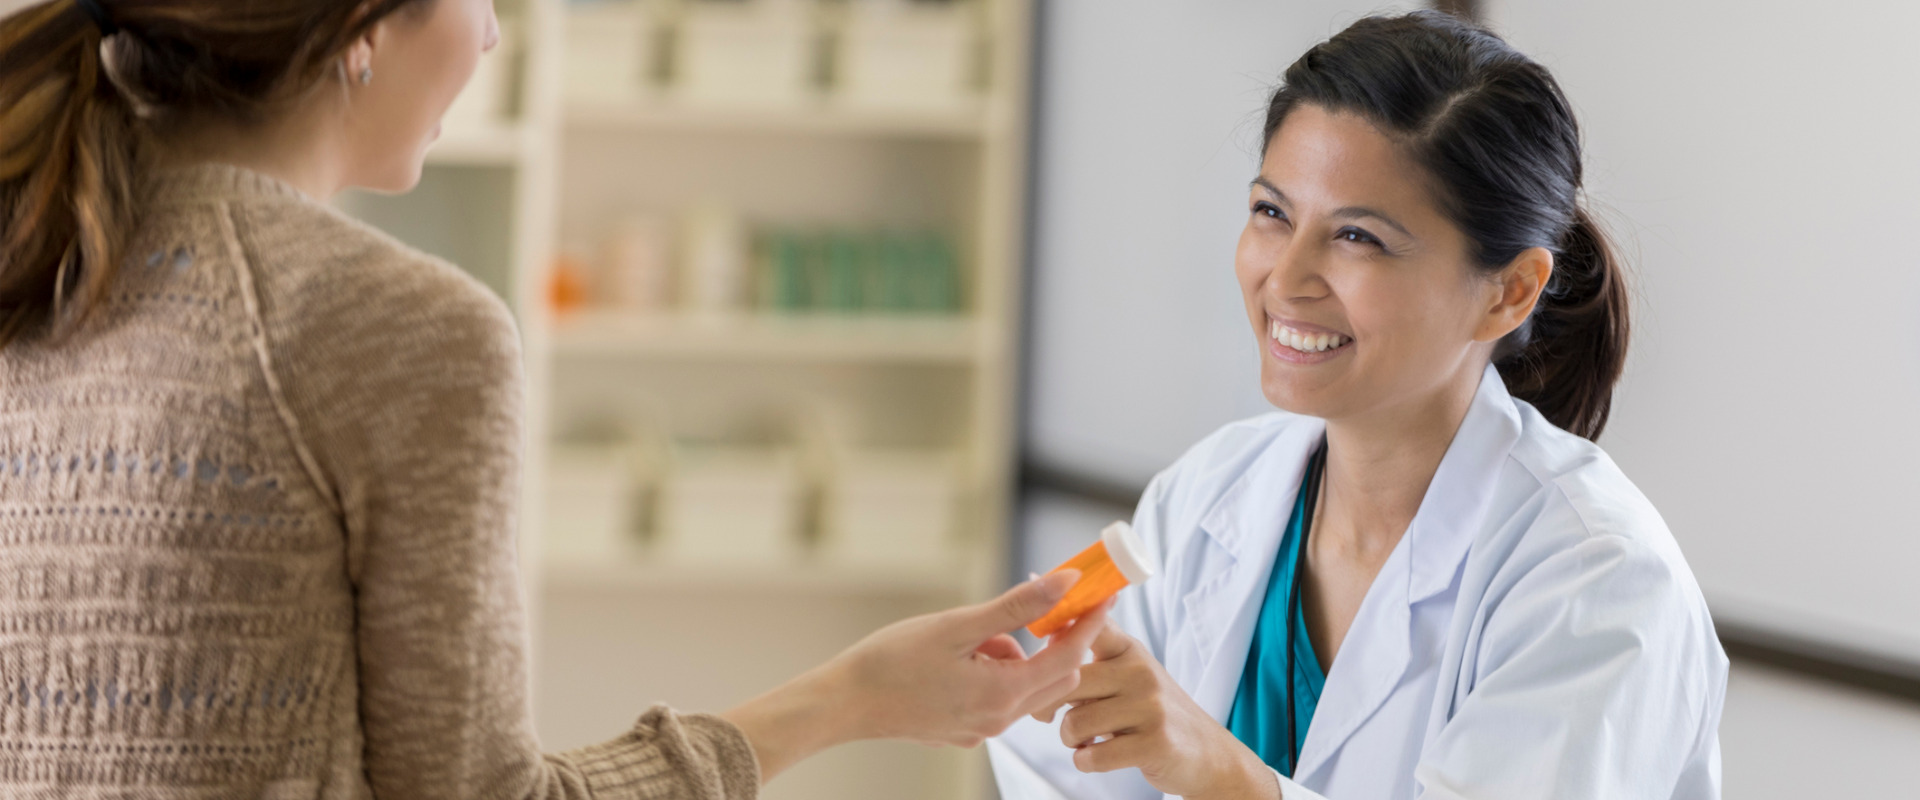 pharmacy technician talking to a patient about their prescription